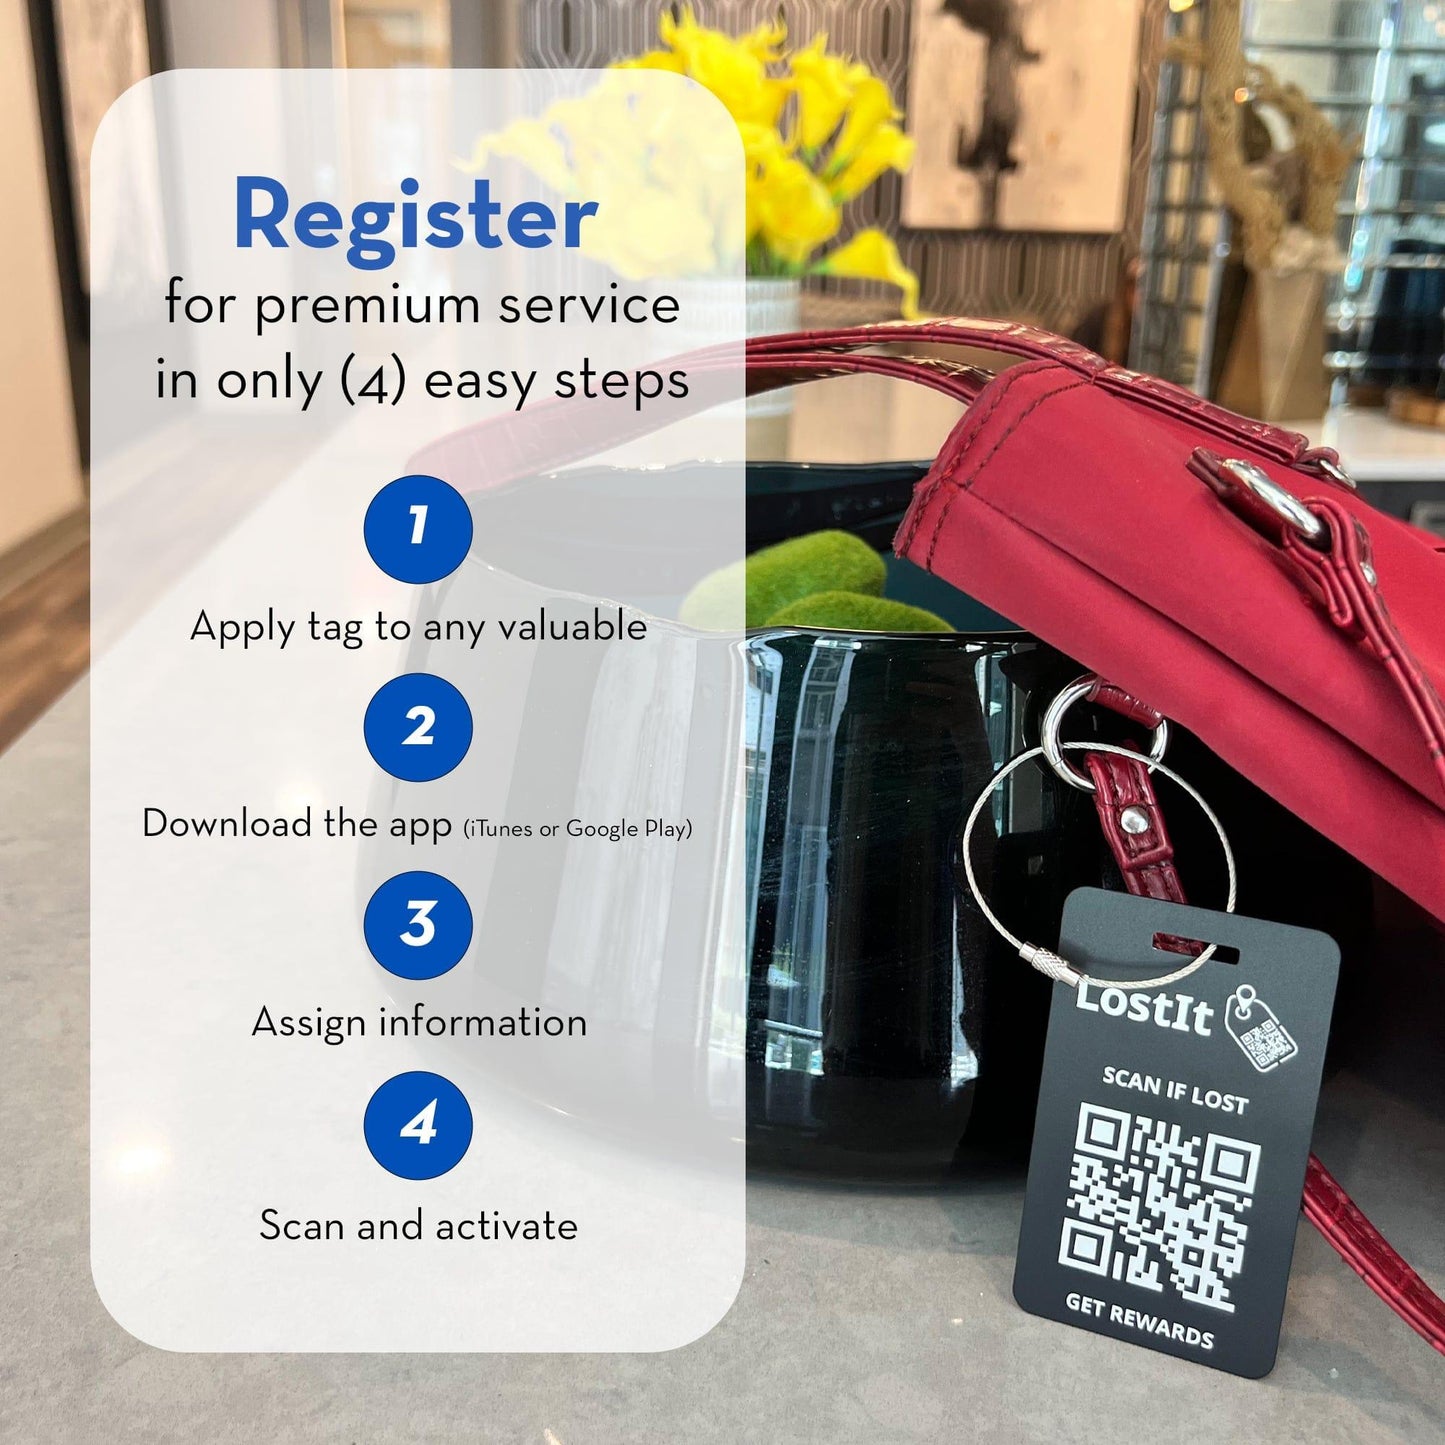 To activate your LostIt Tag, follow the following easy steps. (1) Apply your LostIt Tag to any personal item. (2) Download the app from the App Store or Google Play. (3) Assign information to your time through the app. (4) Activate your item by scanning it through your app.